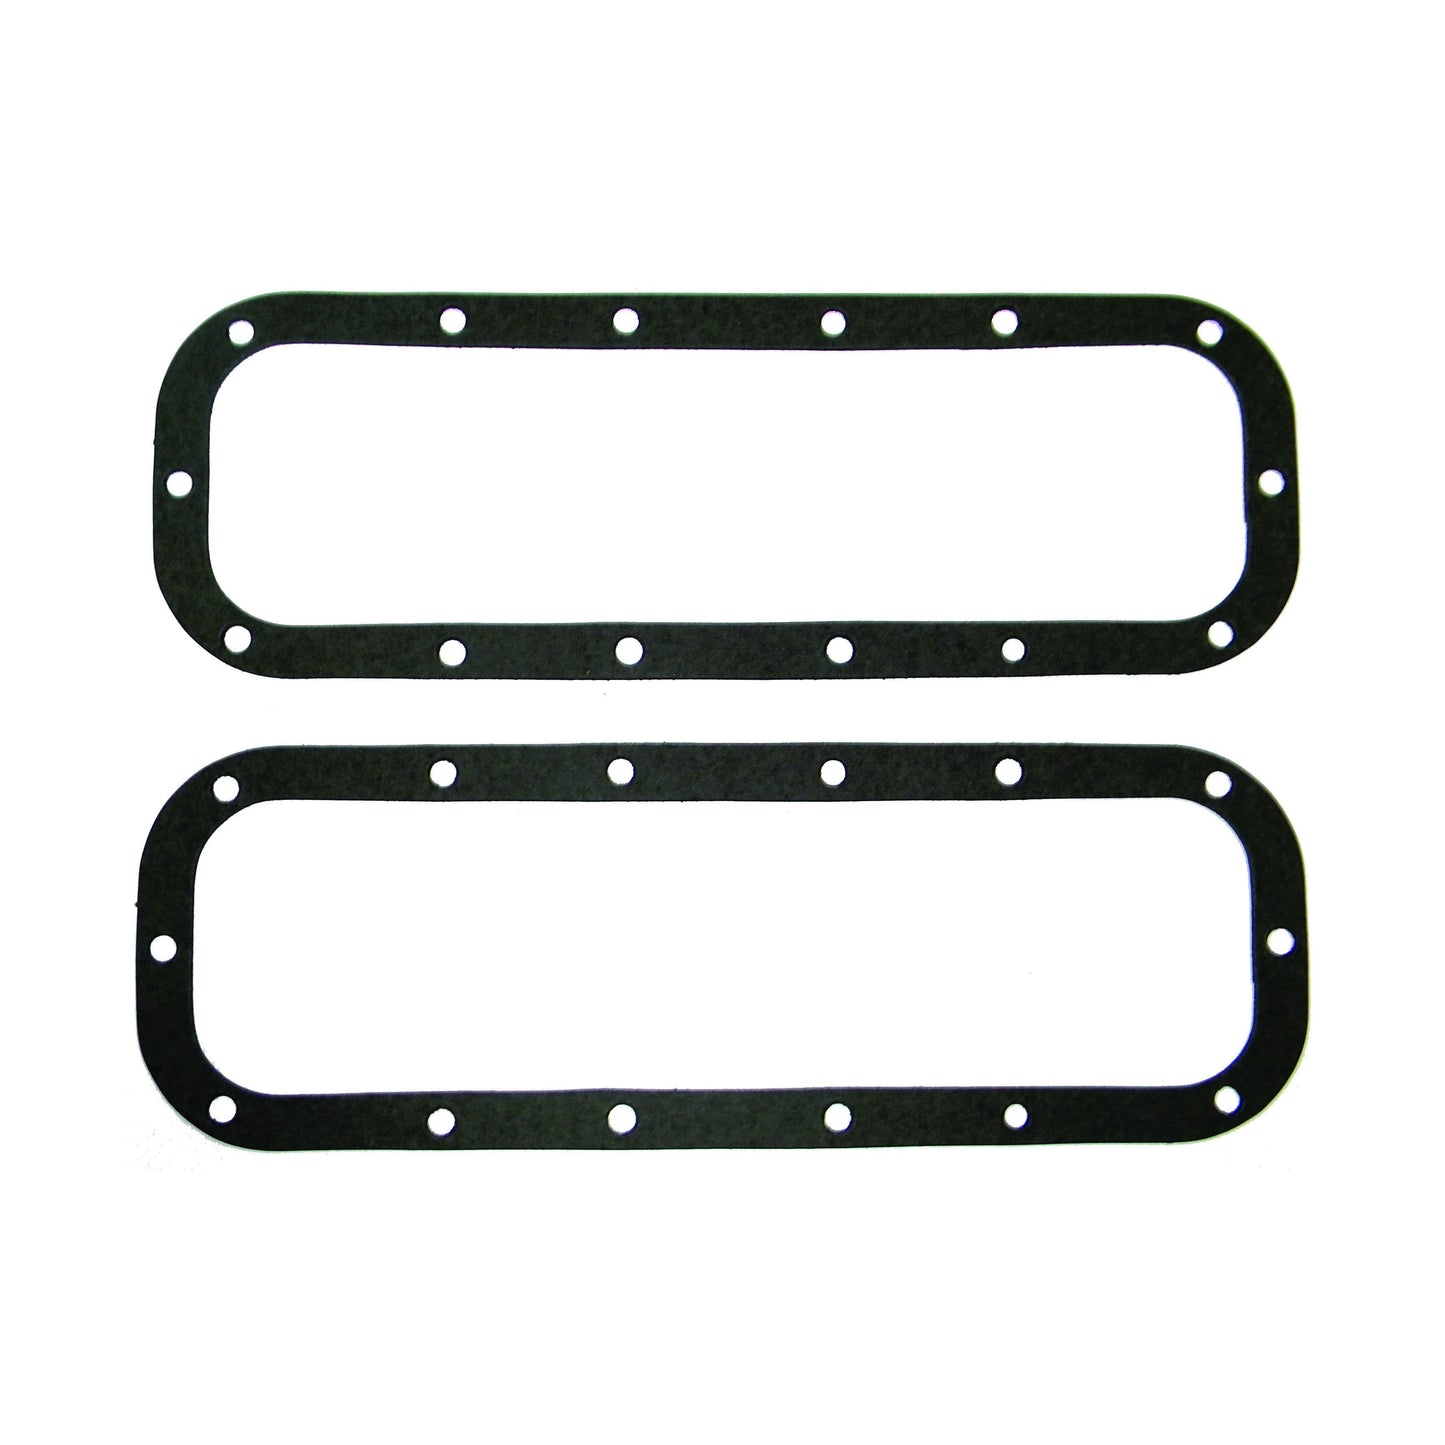 Cover Lifter Gasket Set For Mack Engine E6 2VH/4VH - Replaces 601GC31D